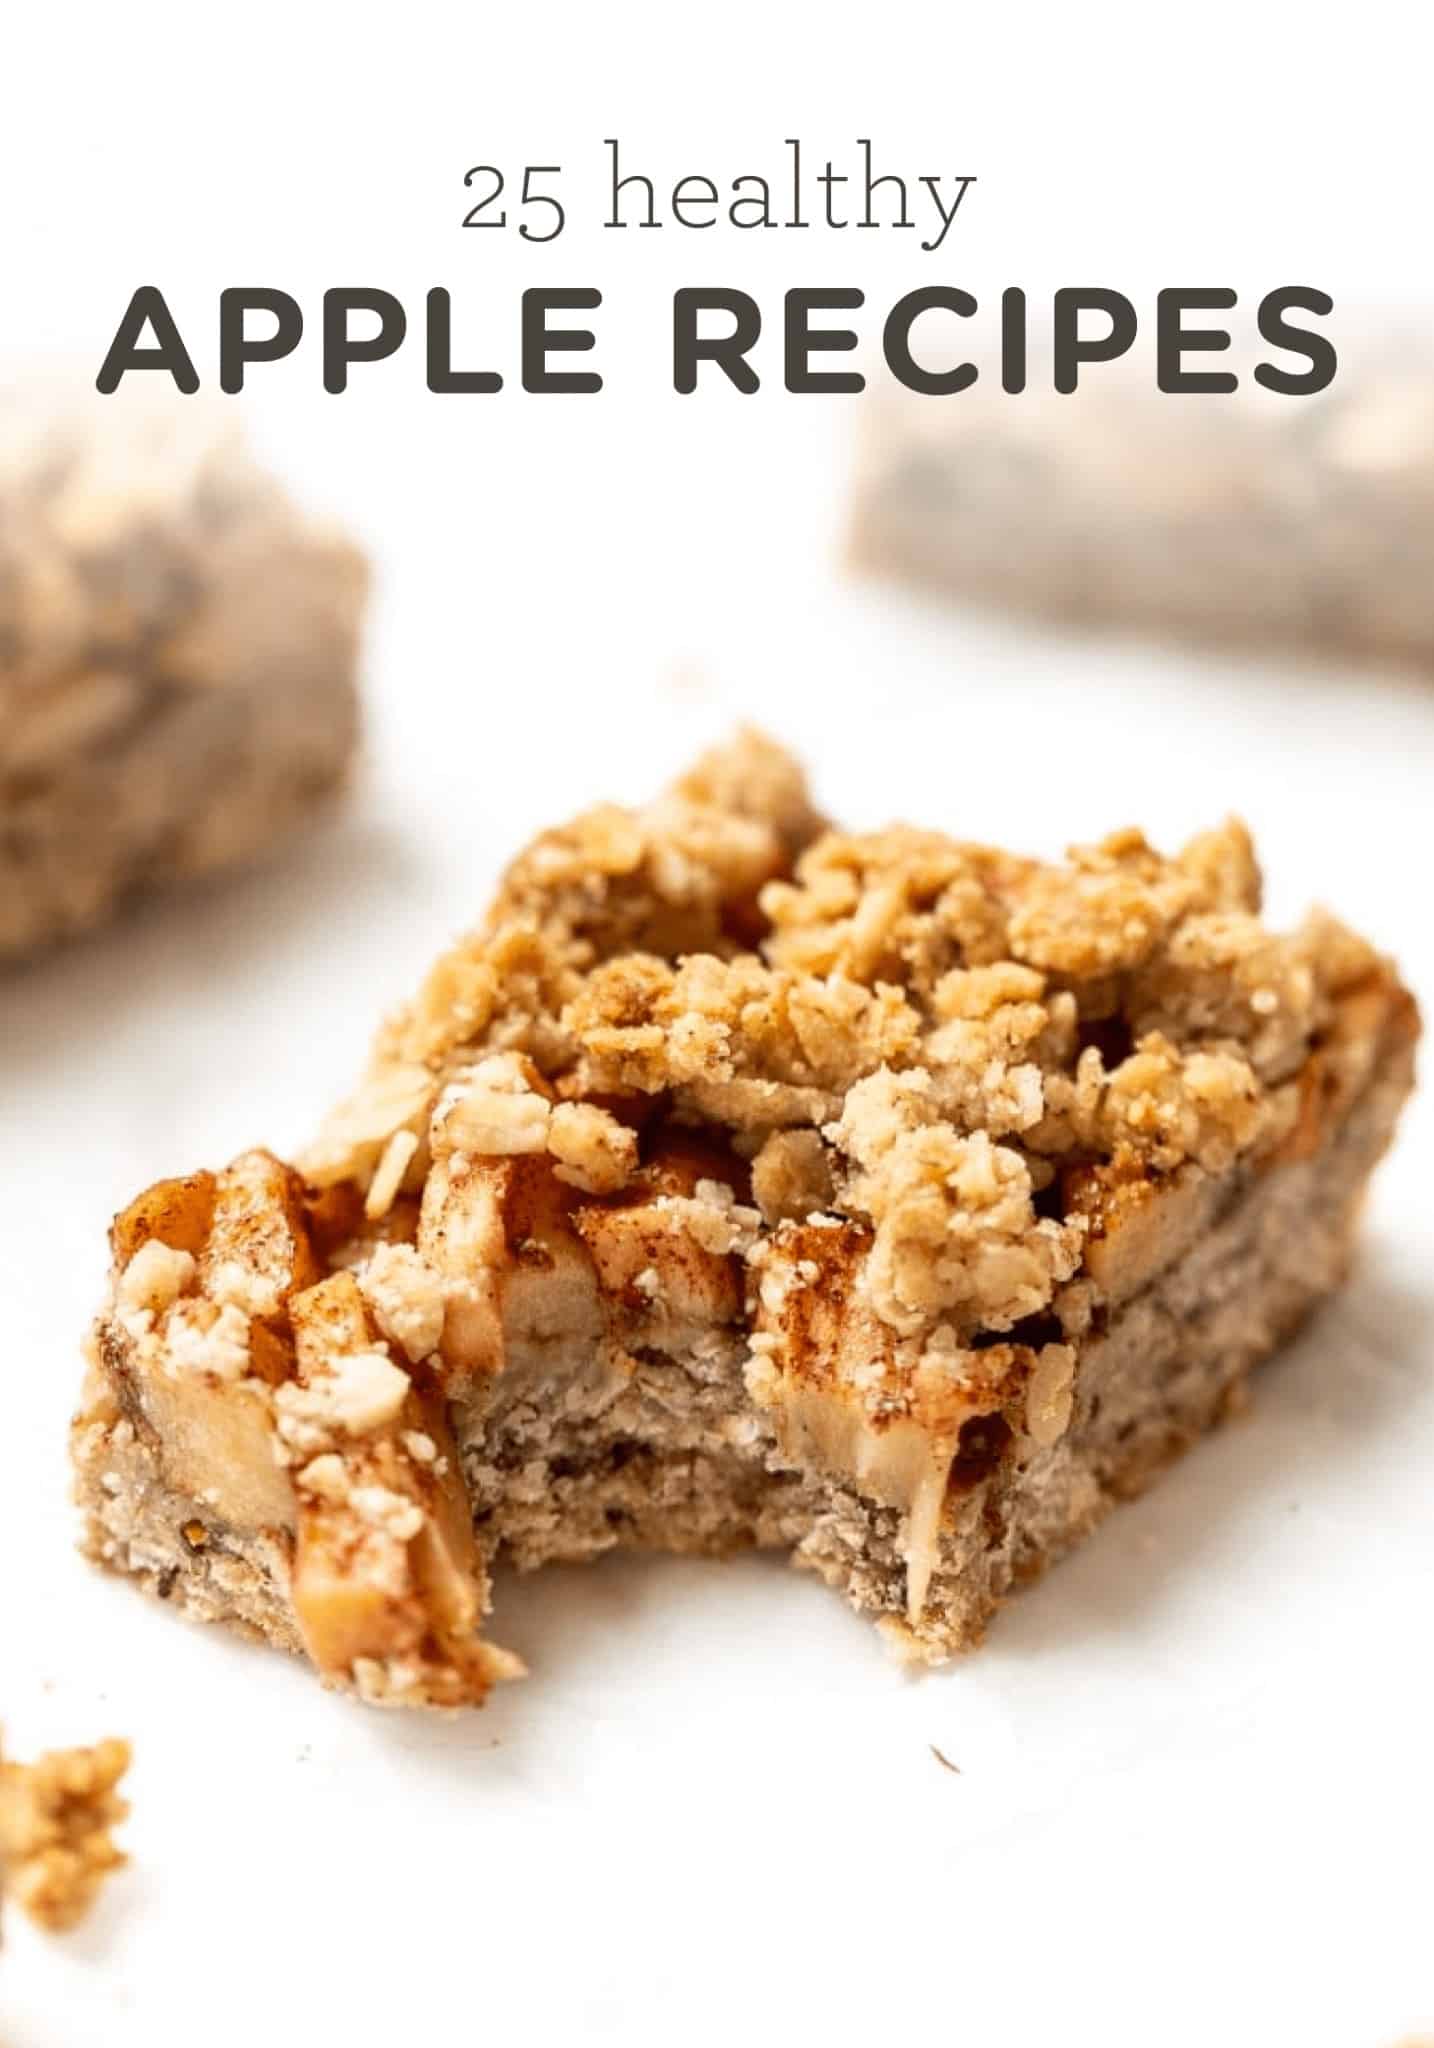 Apple bar with bite taken out of the corner, with text overlay that says 25 healthy apple recipes